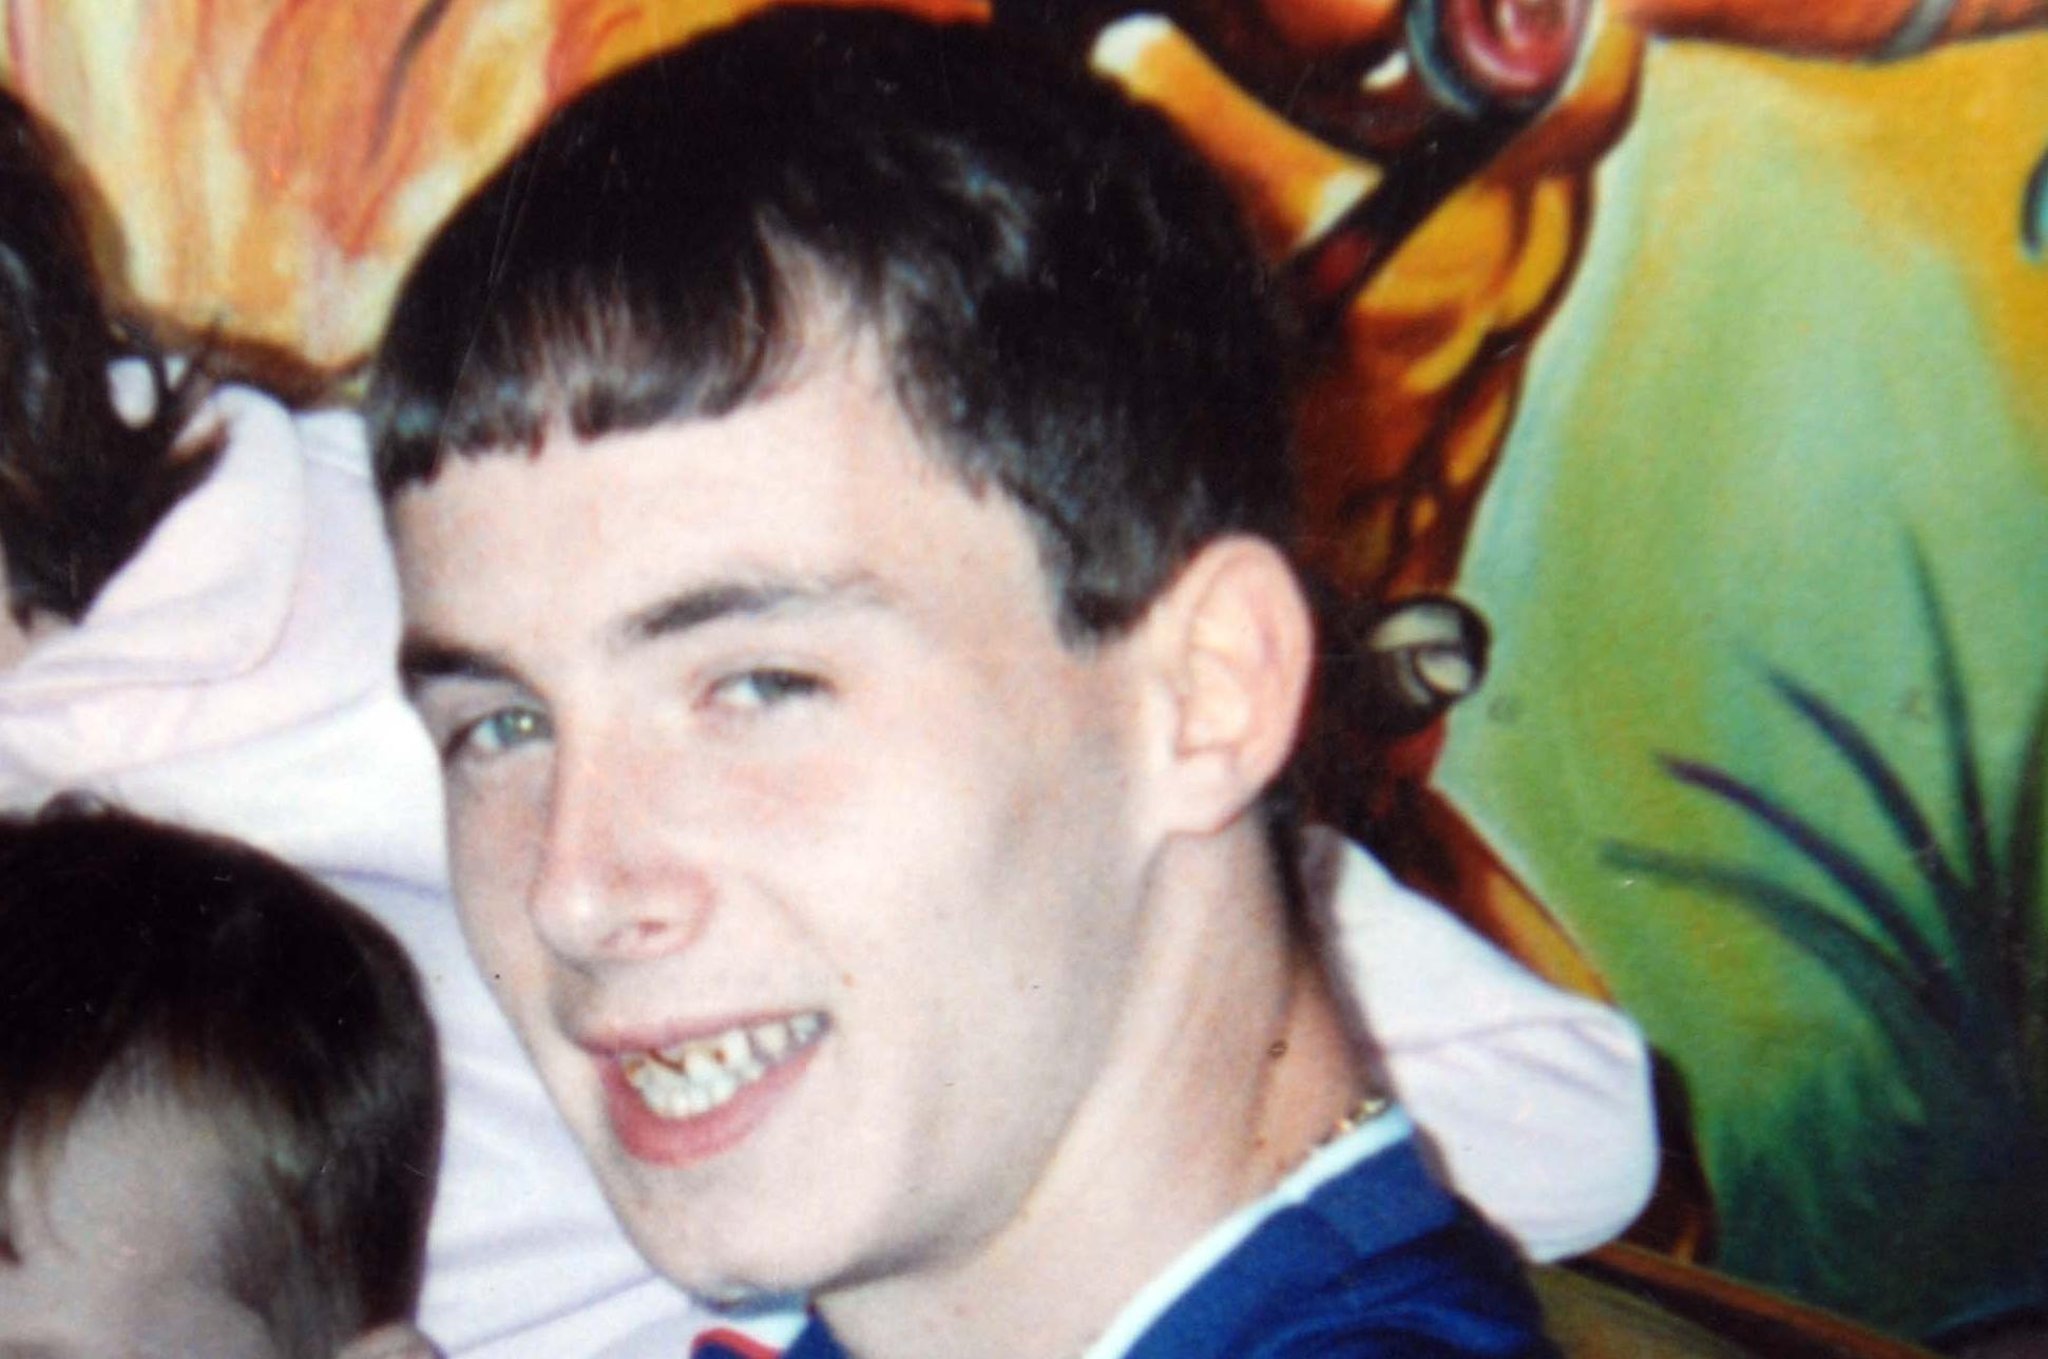 Officer justified in using lethal force in 2003 Neil McConville shooting, coroner rules